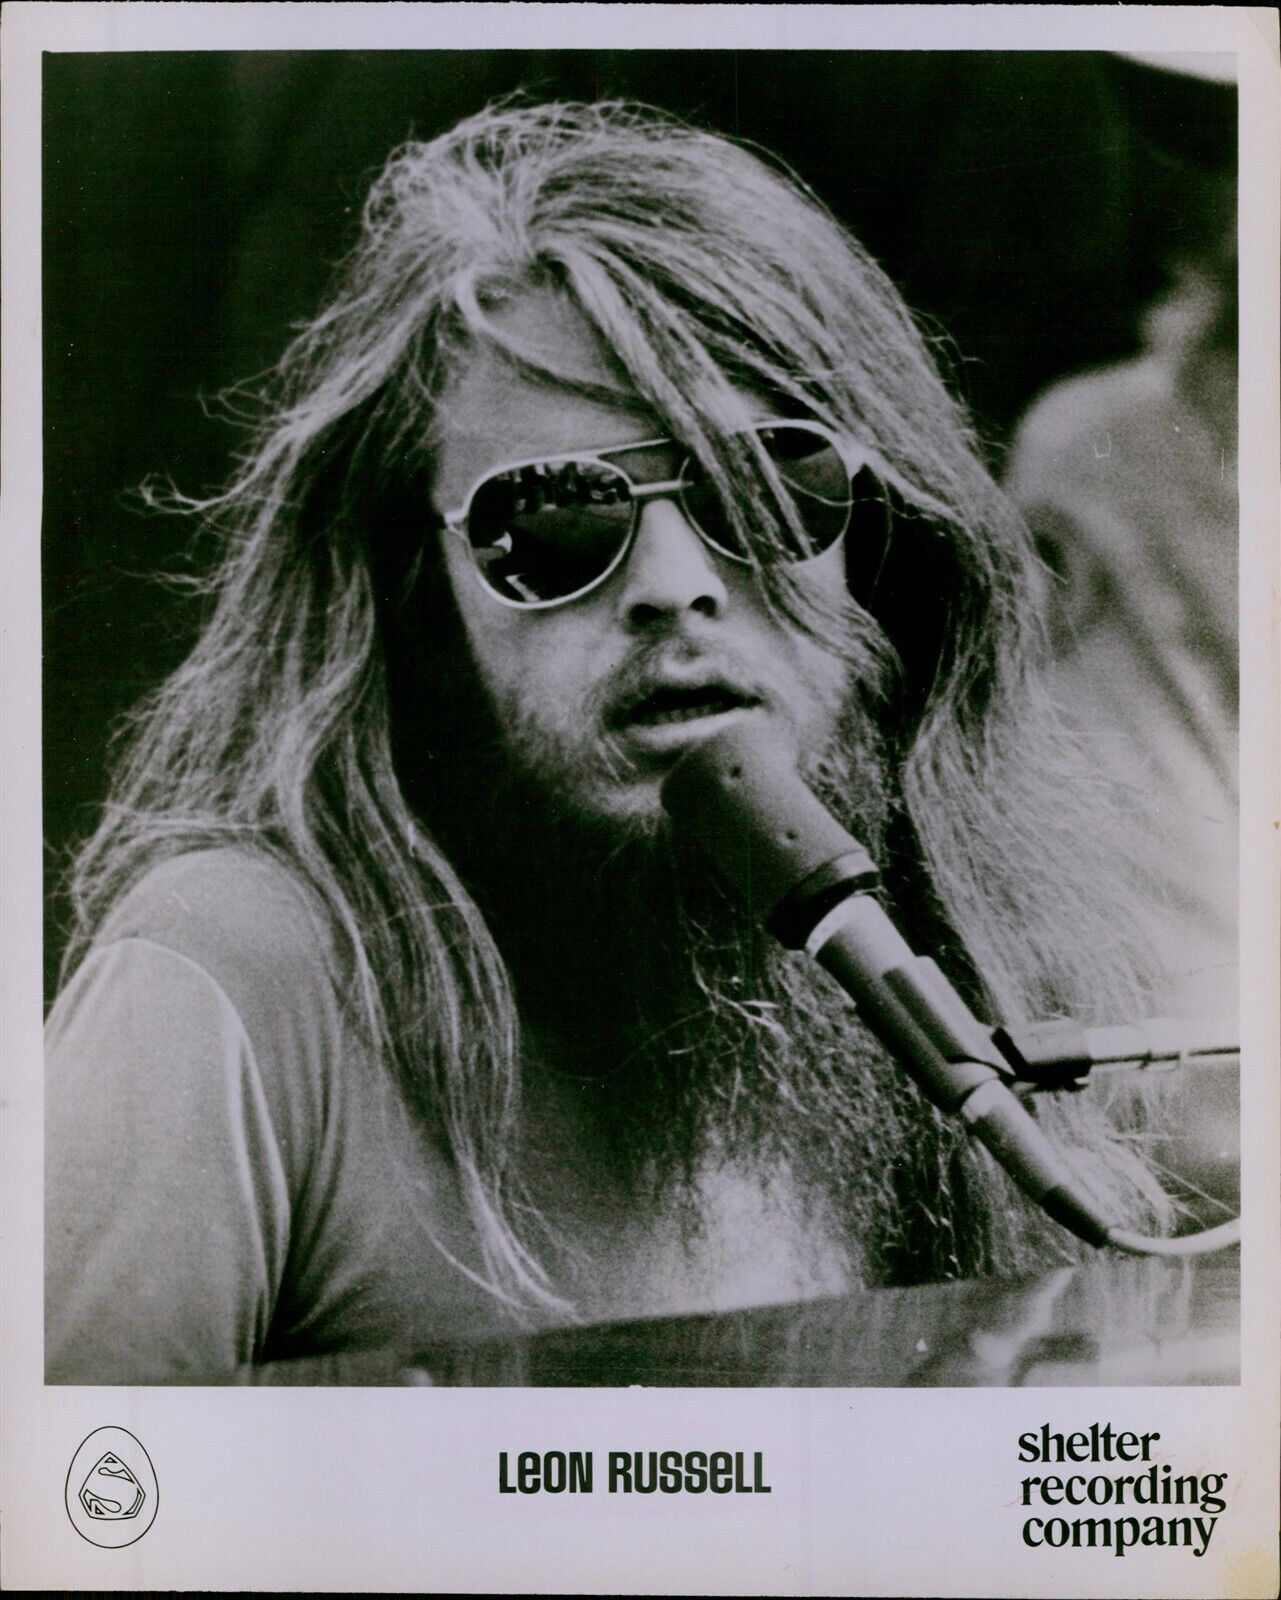 LG865 Orig Photo LEON RUSSELL Musician Songwriter Iconic Rock Pop Performance